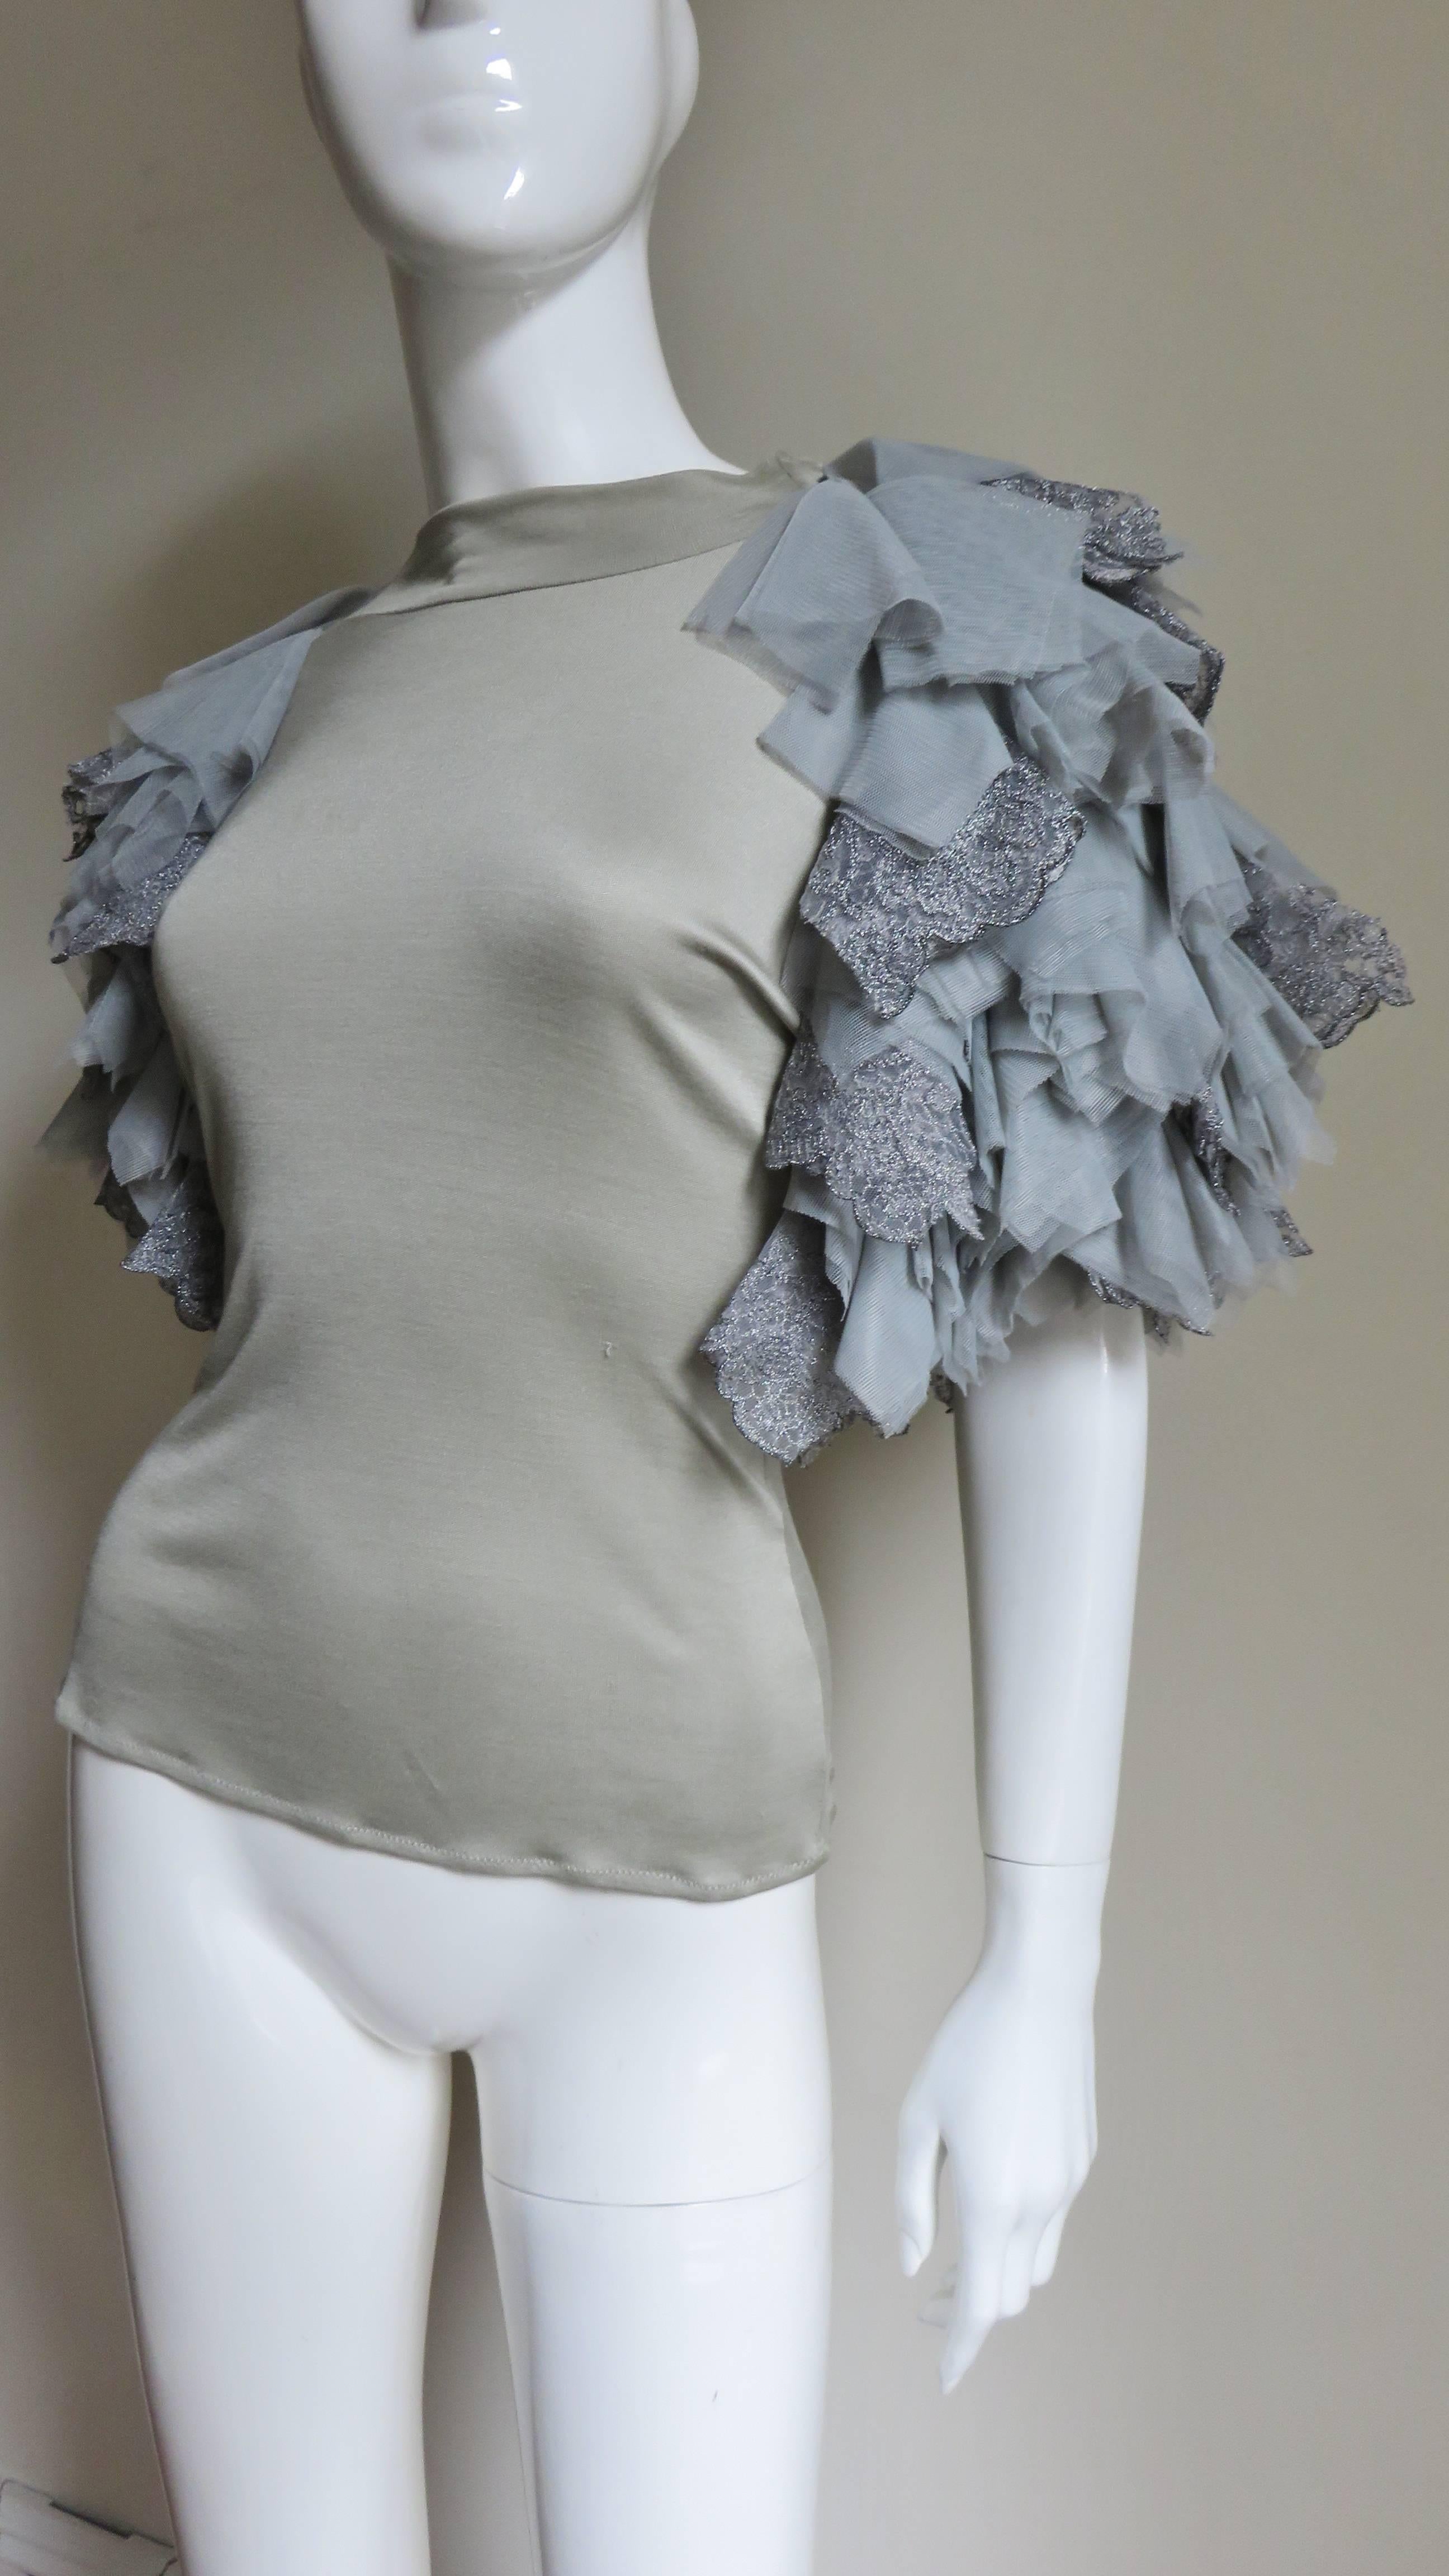 An incredible grey fine silk knit top from Alexander McQueen.  It is semi fitted with a crew neckline and elaborate grey net, tulle and lace layered sleeves.
Unworn condition. Fits sizes Extra Small, Small, Medium.

Bust  35-38